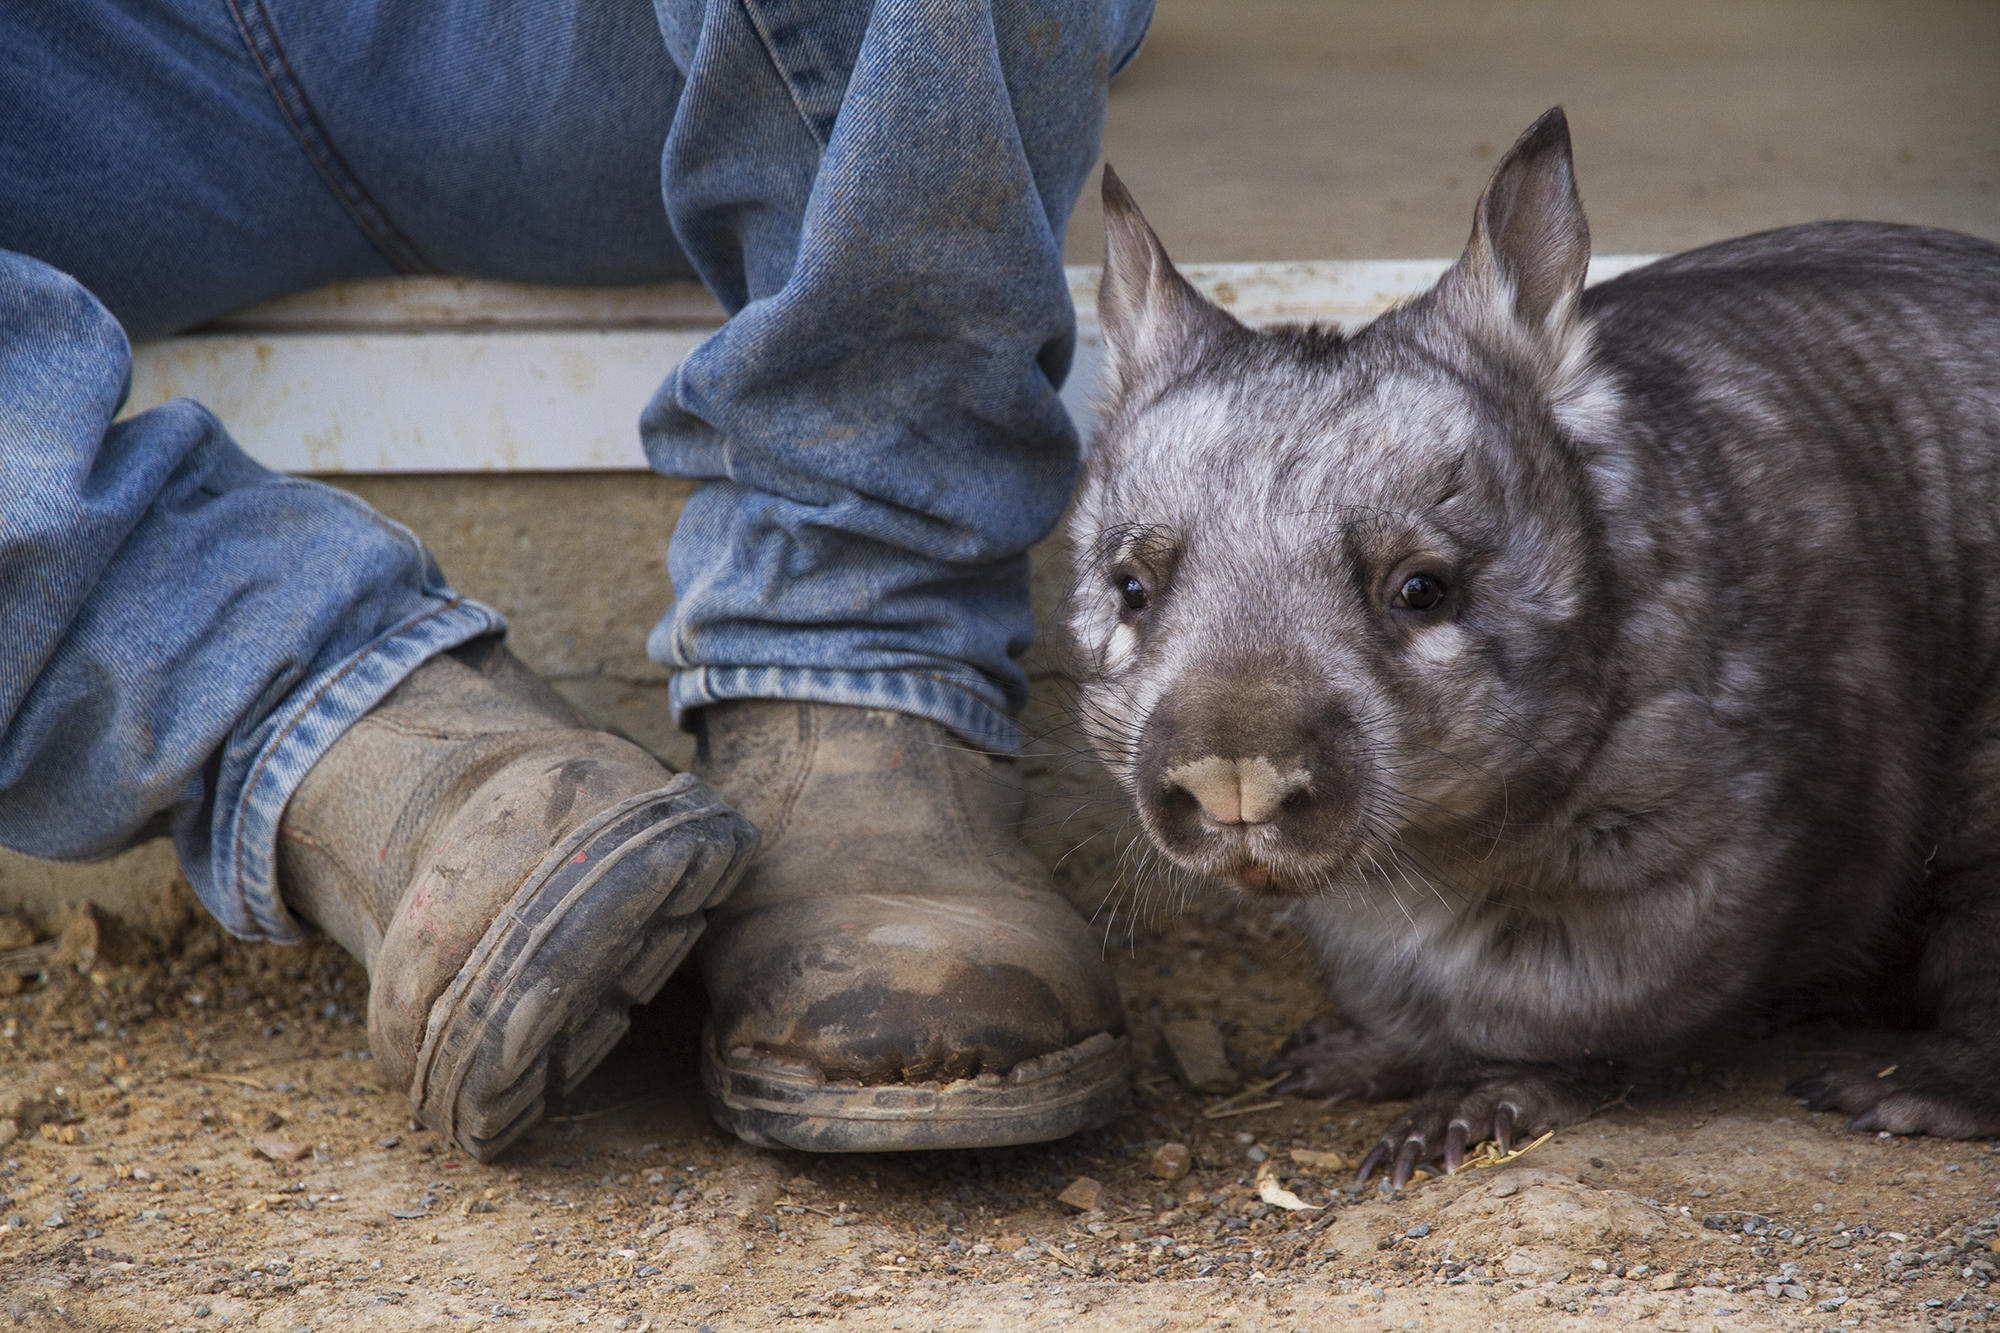  Southern hairy nosed wombat, Mount Larcom.  